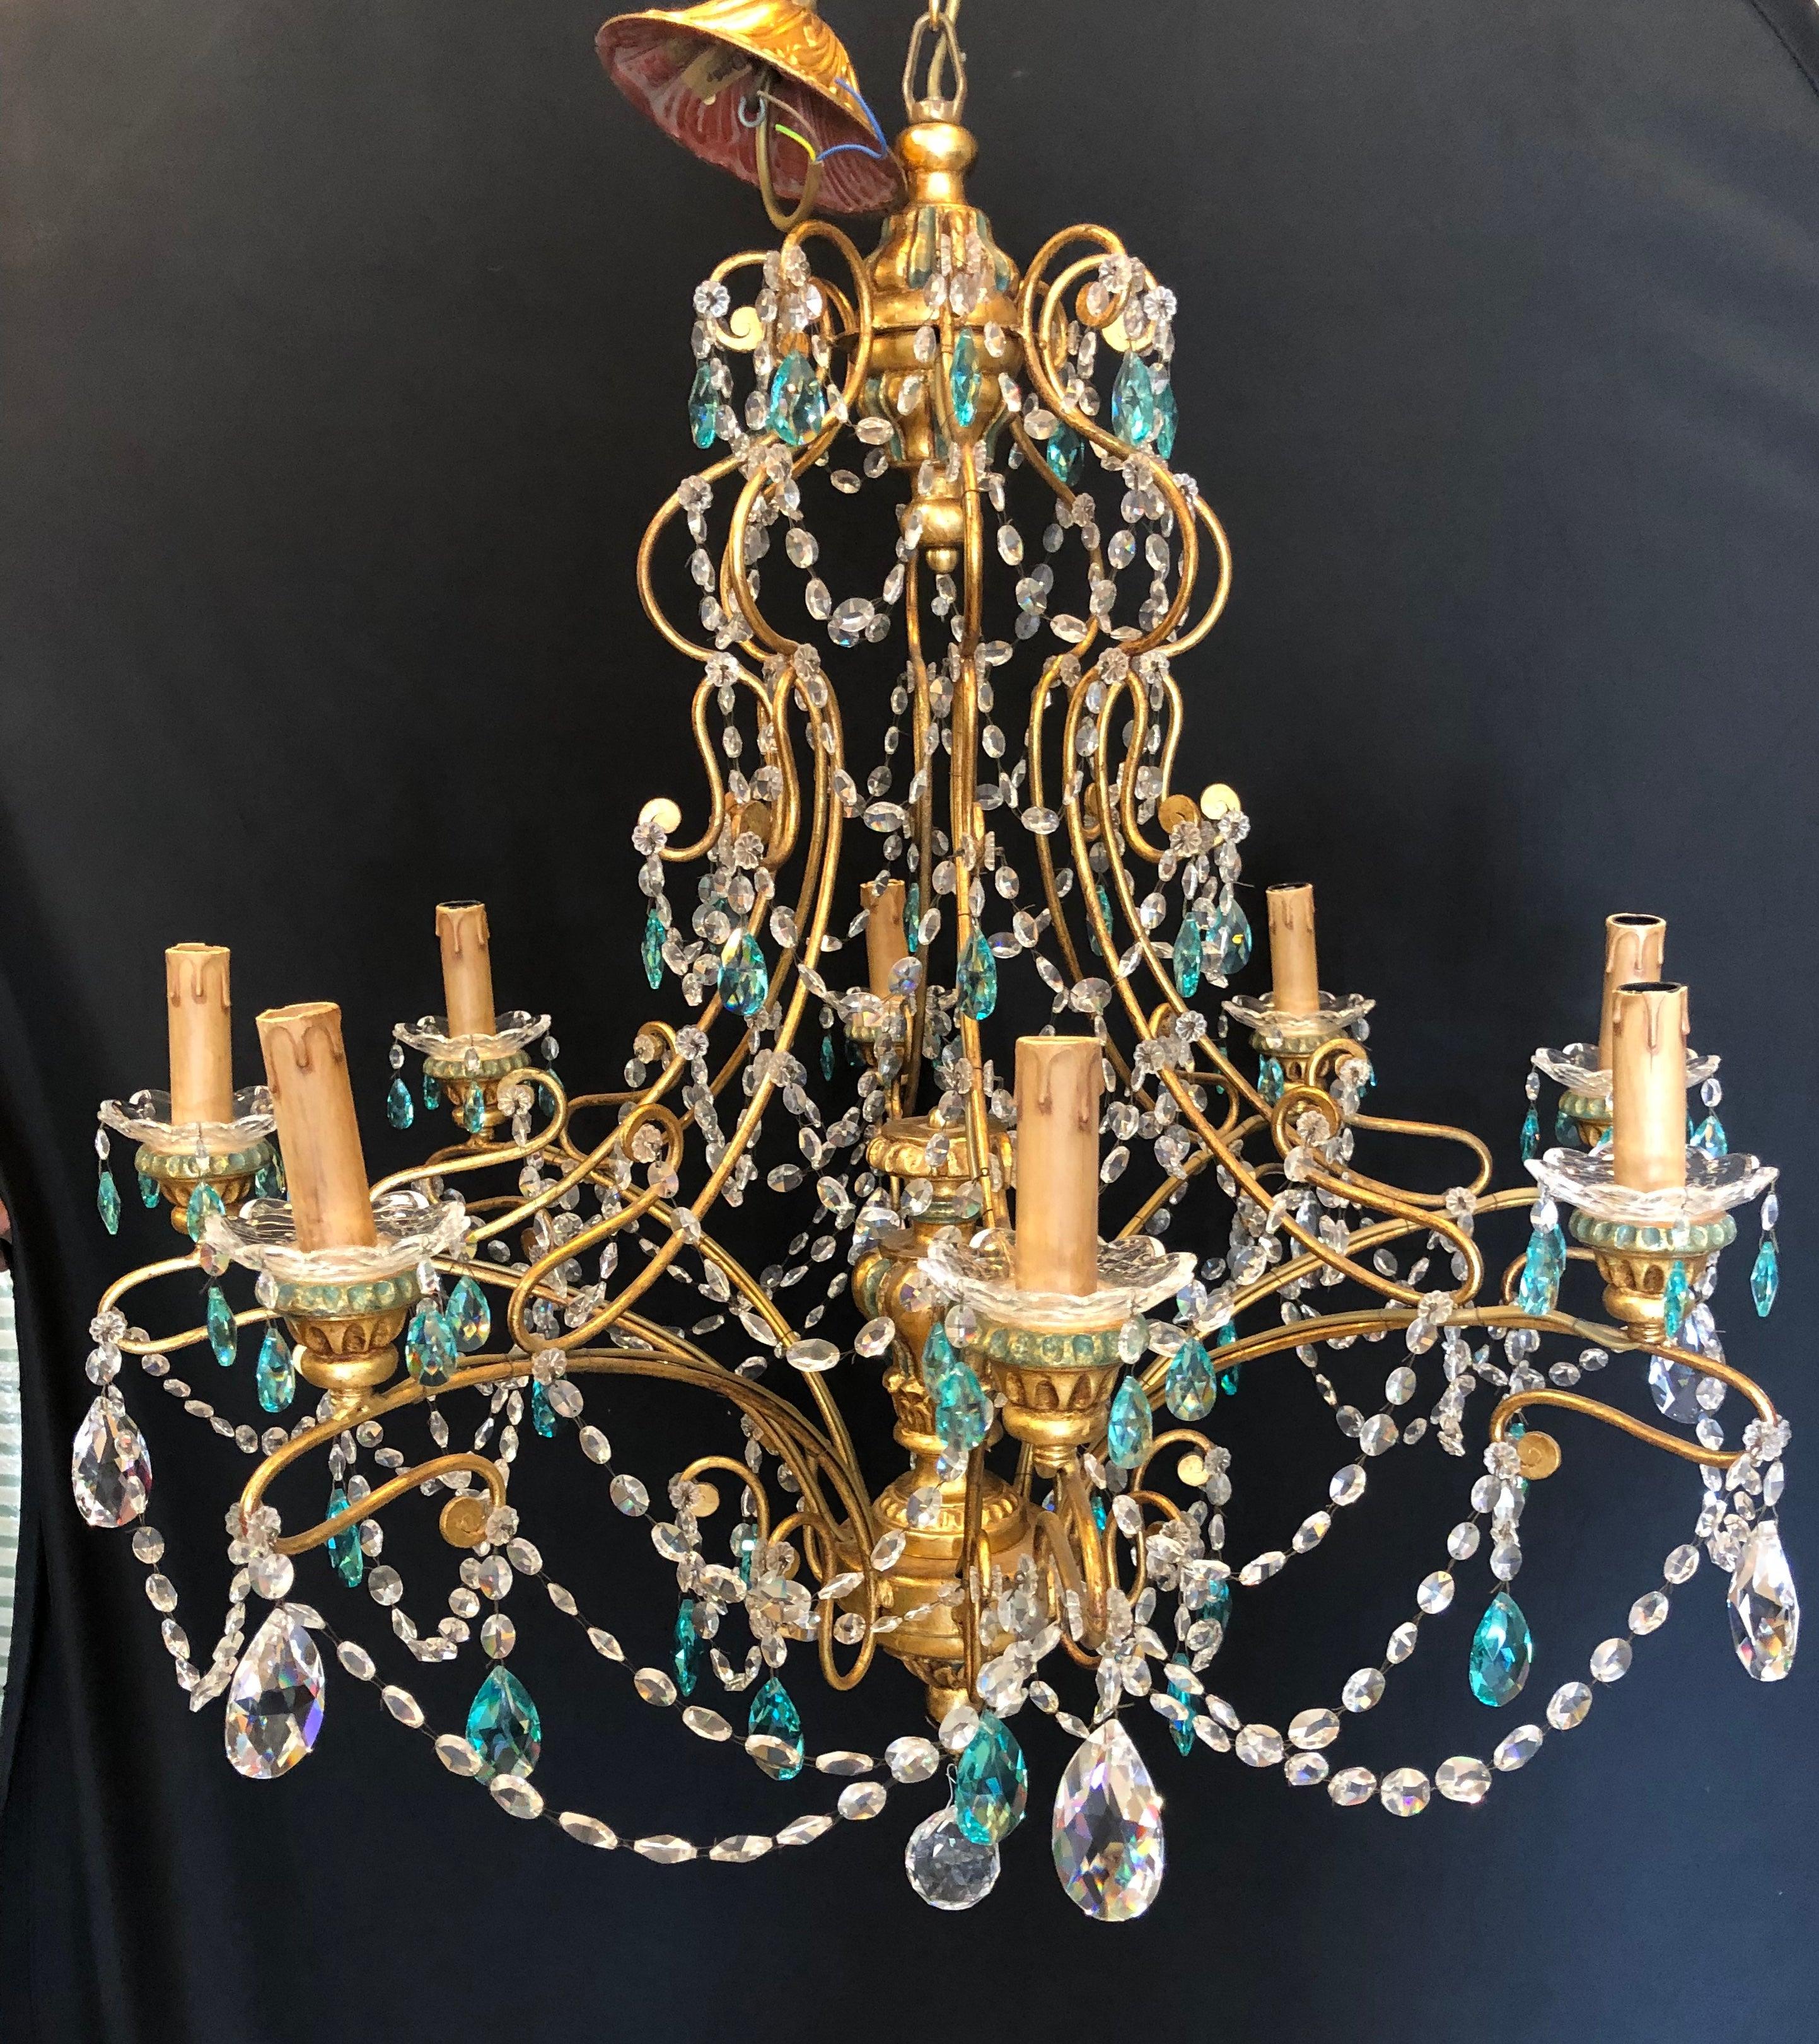 Neoclassical handcrafted Italian gilt metal and crystal chandelier. Having a pair of matching wall sconce sold separately this sleek and stylish Murano crystal chandelier is reminiscent of the workmanship that has made Alba lighting a household name